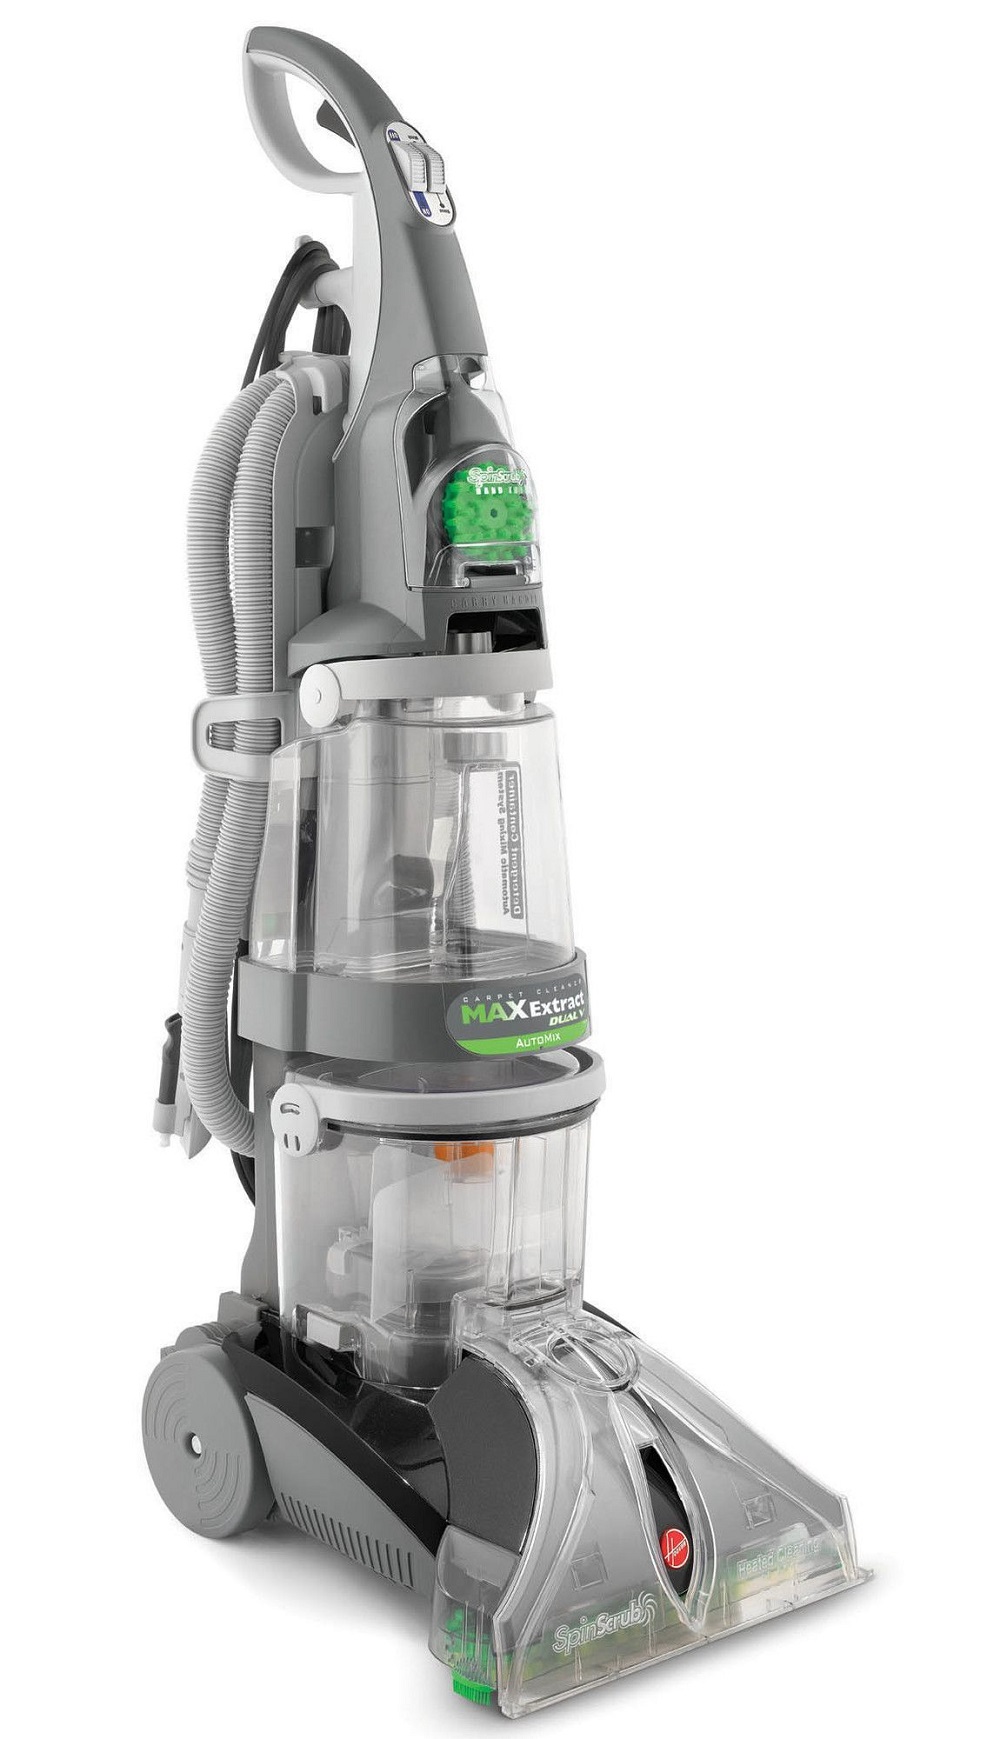 t3-47 The best upholstery steam cleaner you can buy online